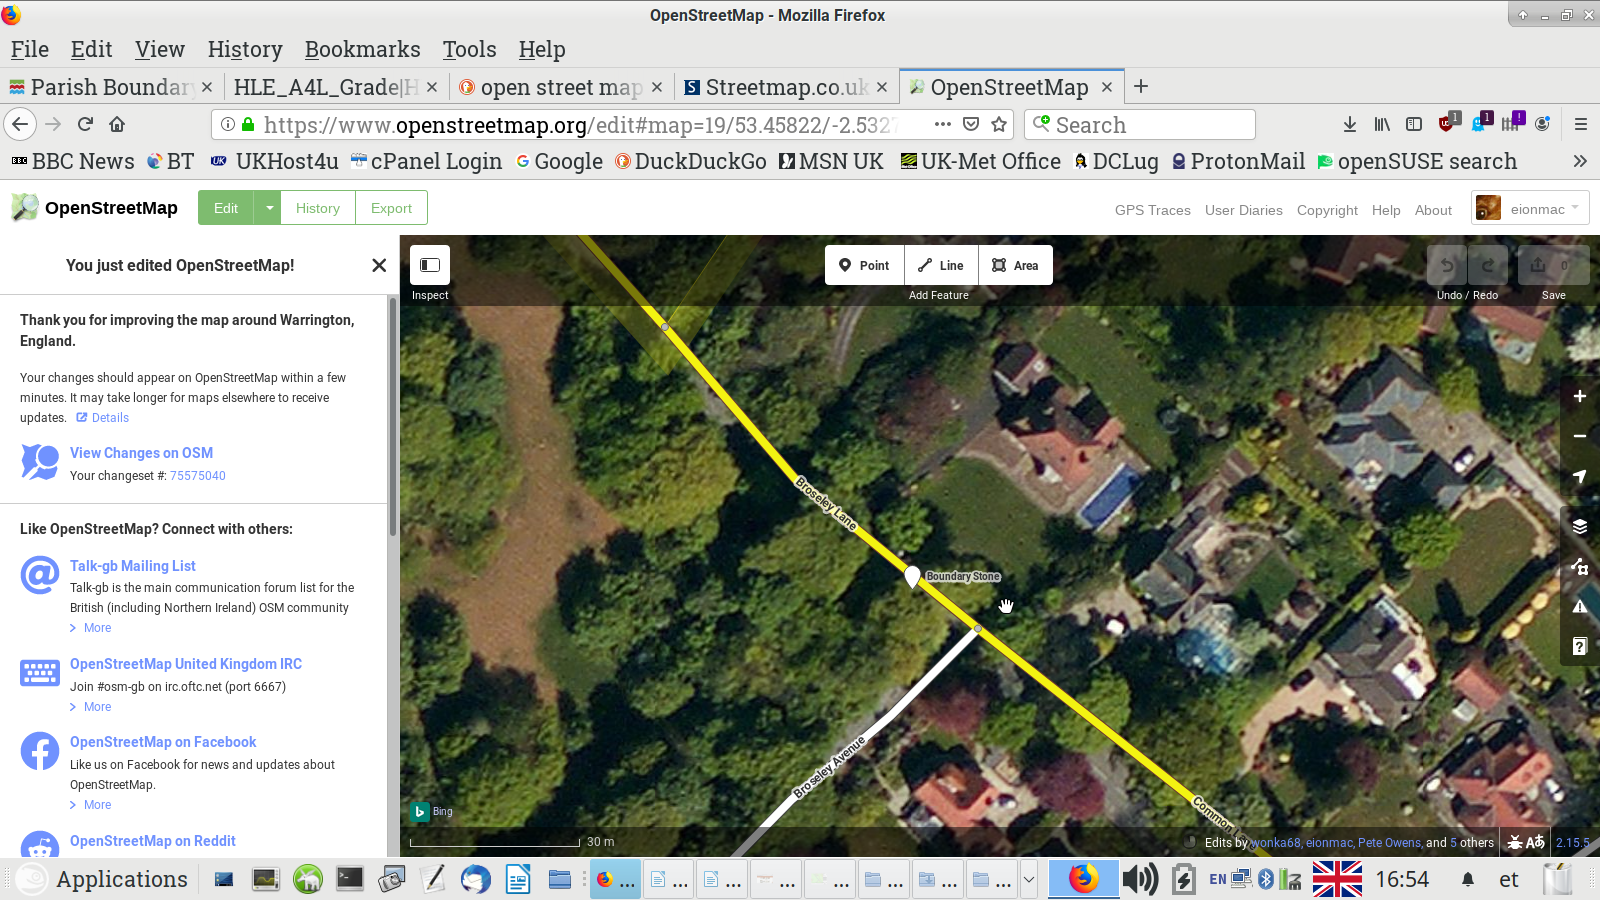 OpenStreet Map edited for boundary stone by EM Screenshot 2019 10 11 16 54 23